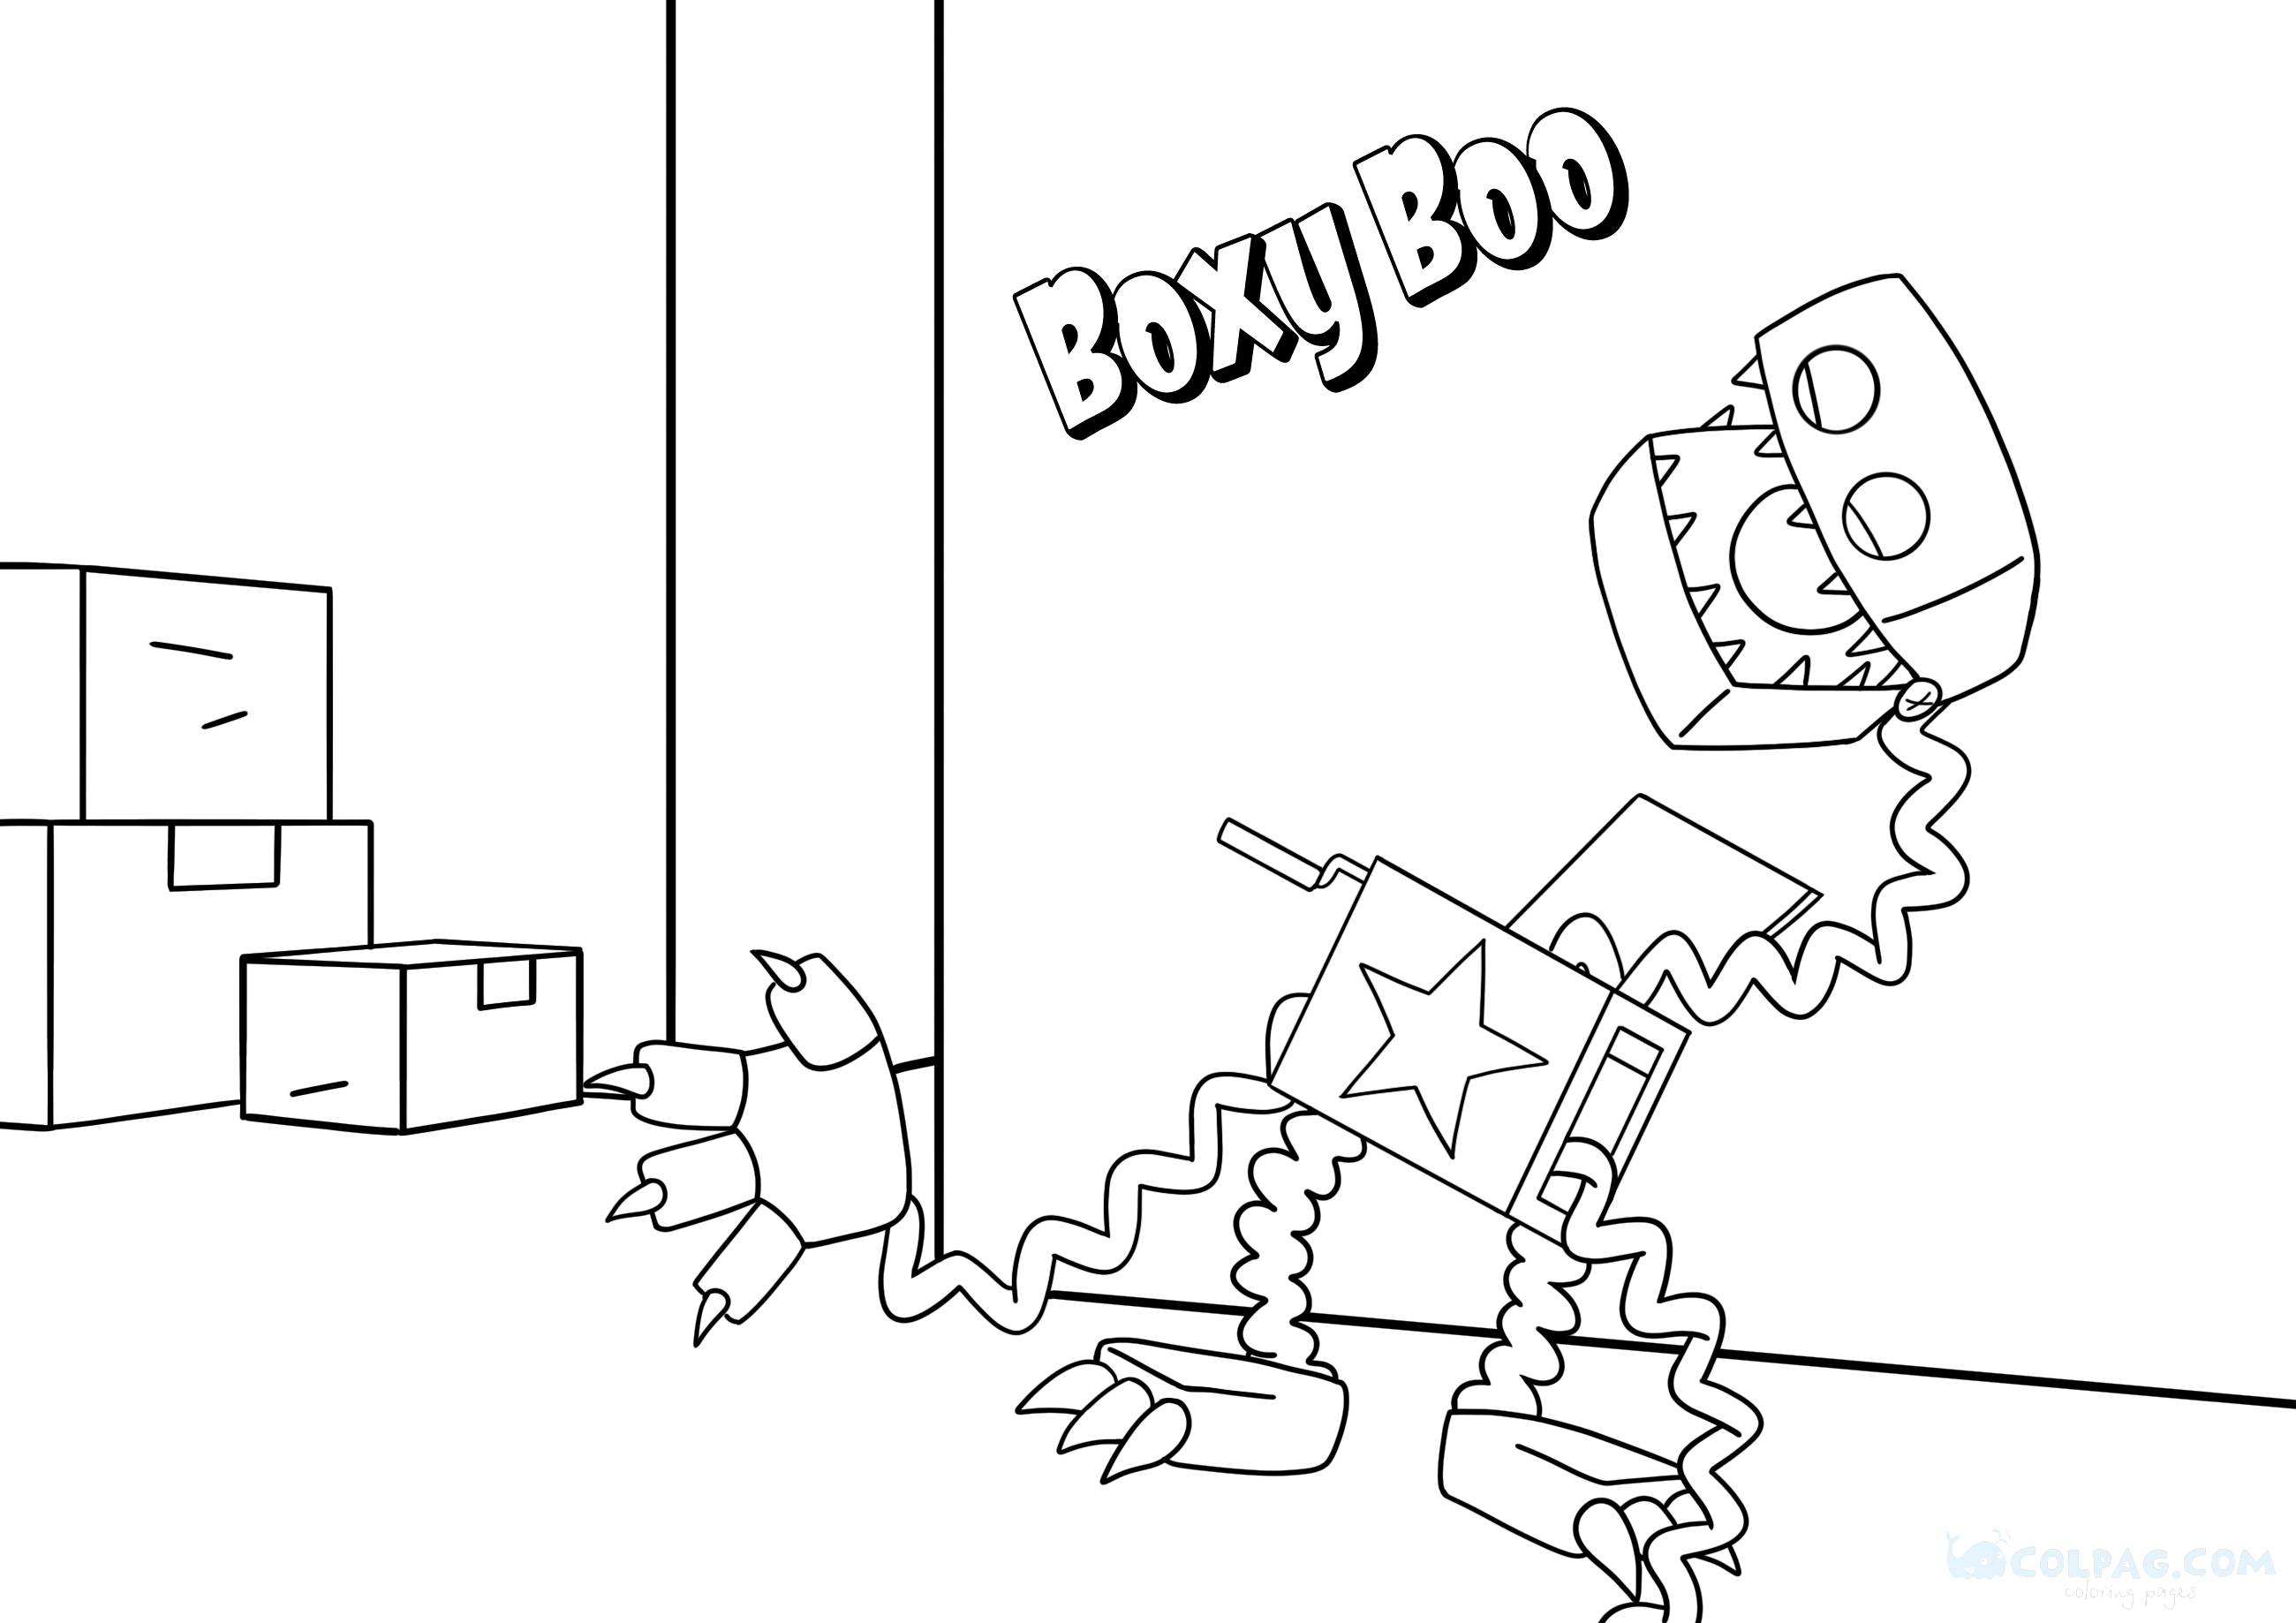 boxy-boo-project-playtime-coloring-page-colpag-com-3